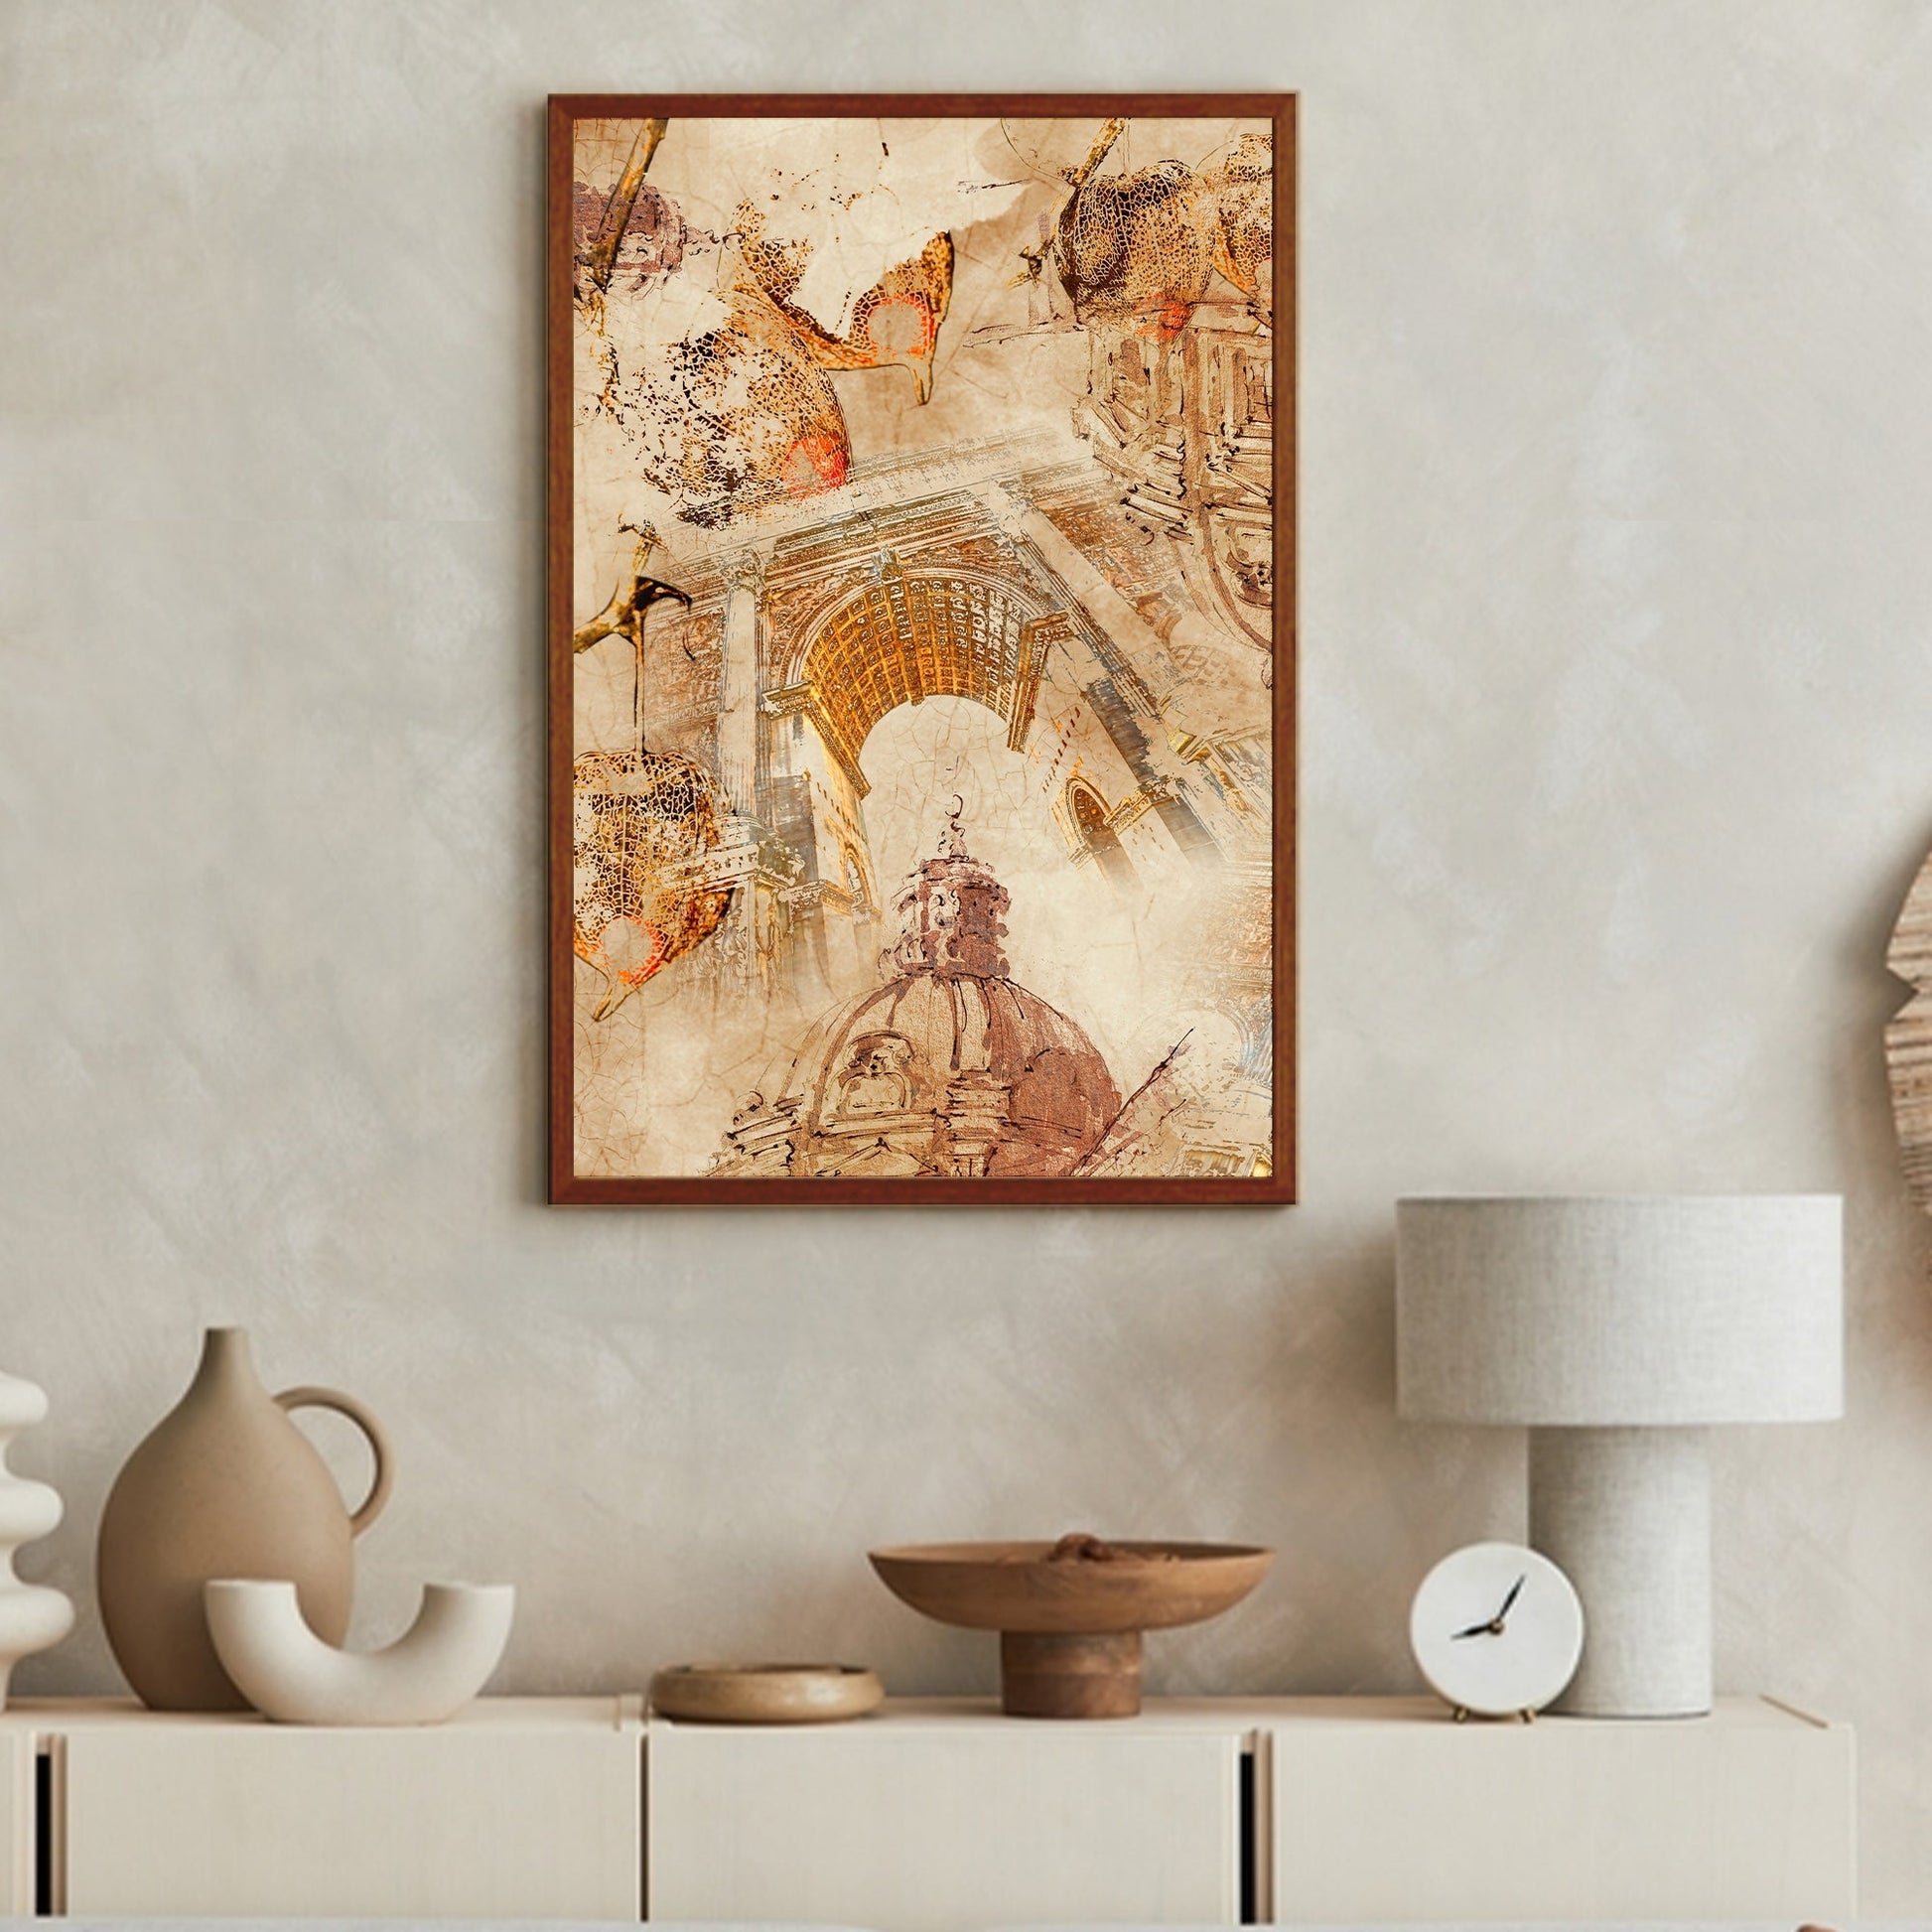 Frame captures the beauty of aging in wall decor print.